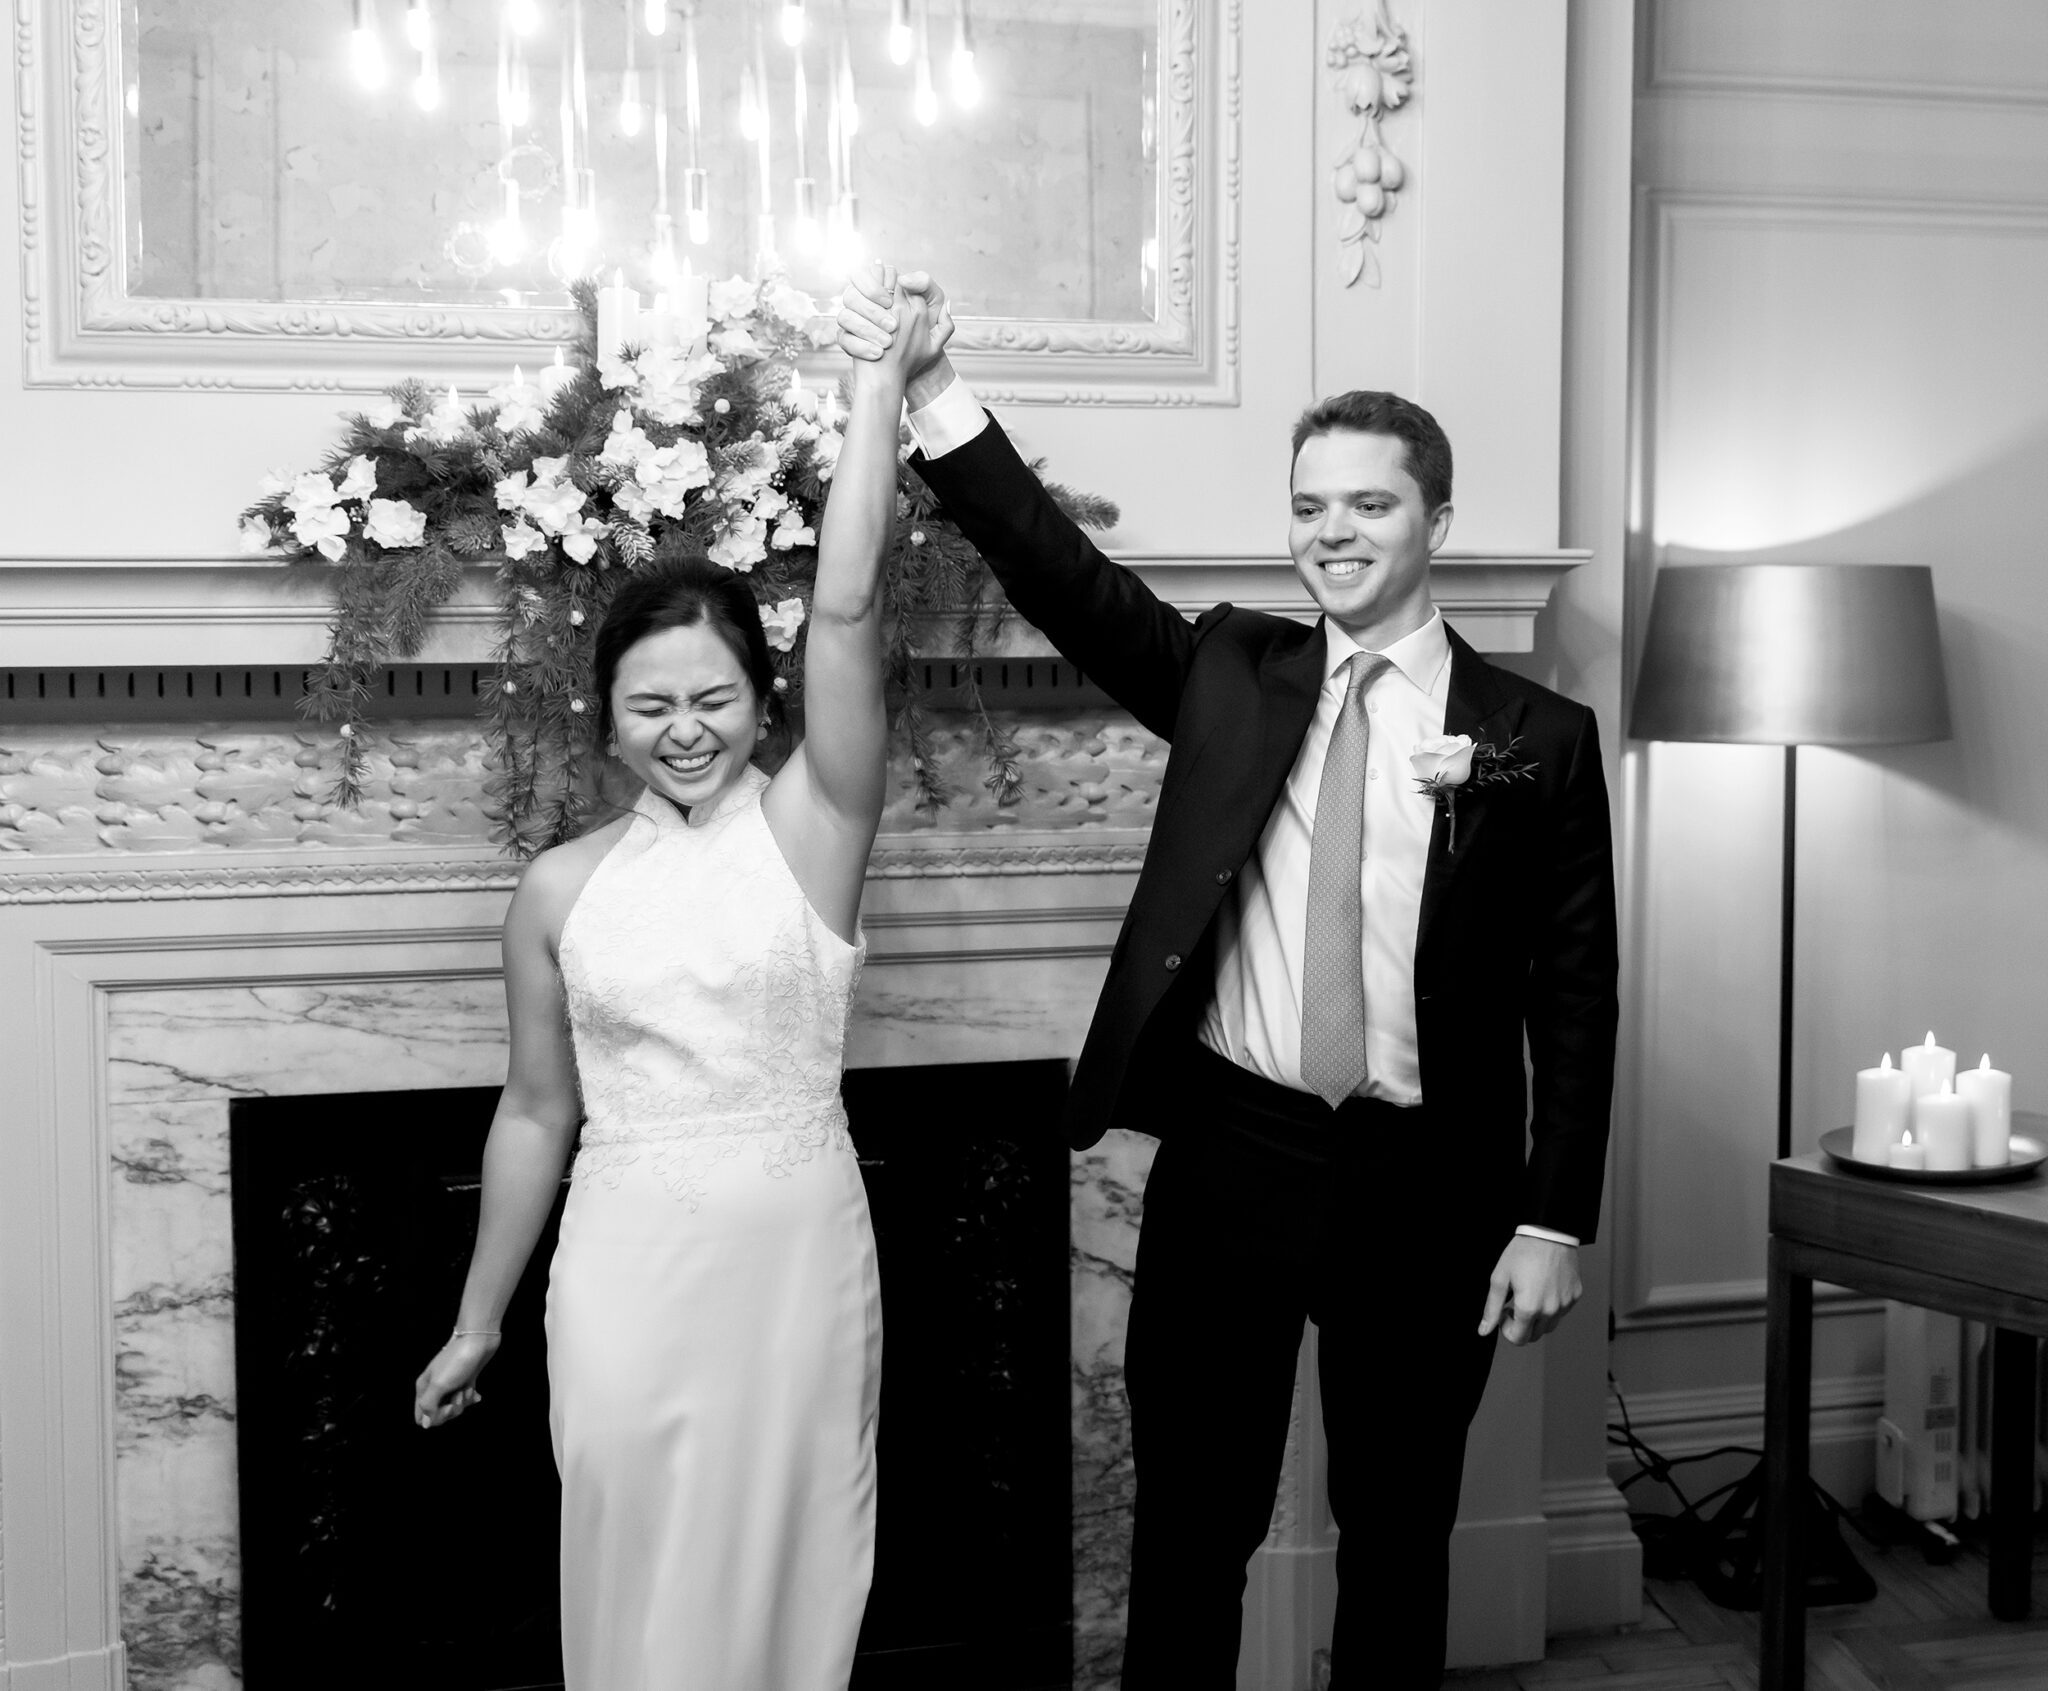 Bride and groom celebrate in wedding ceremony Old Marylebone Town Hall